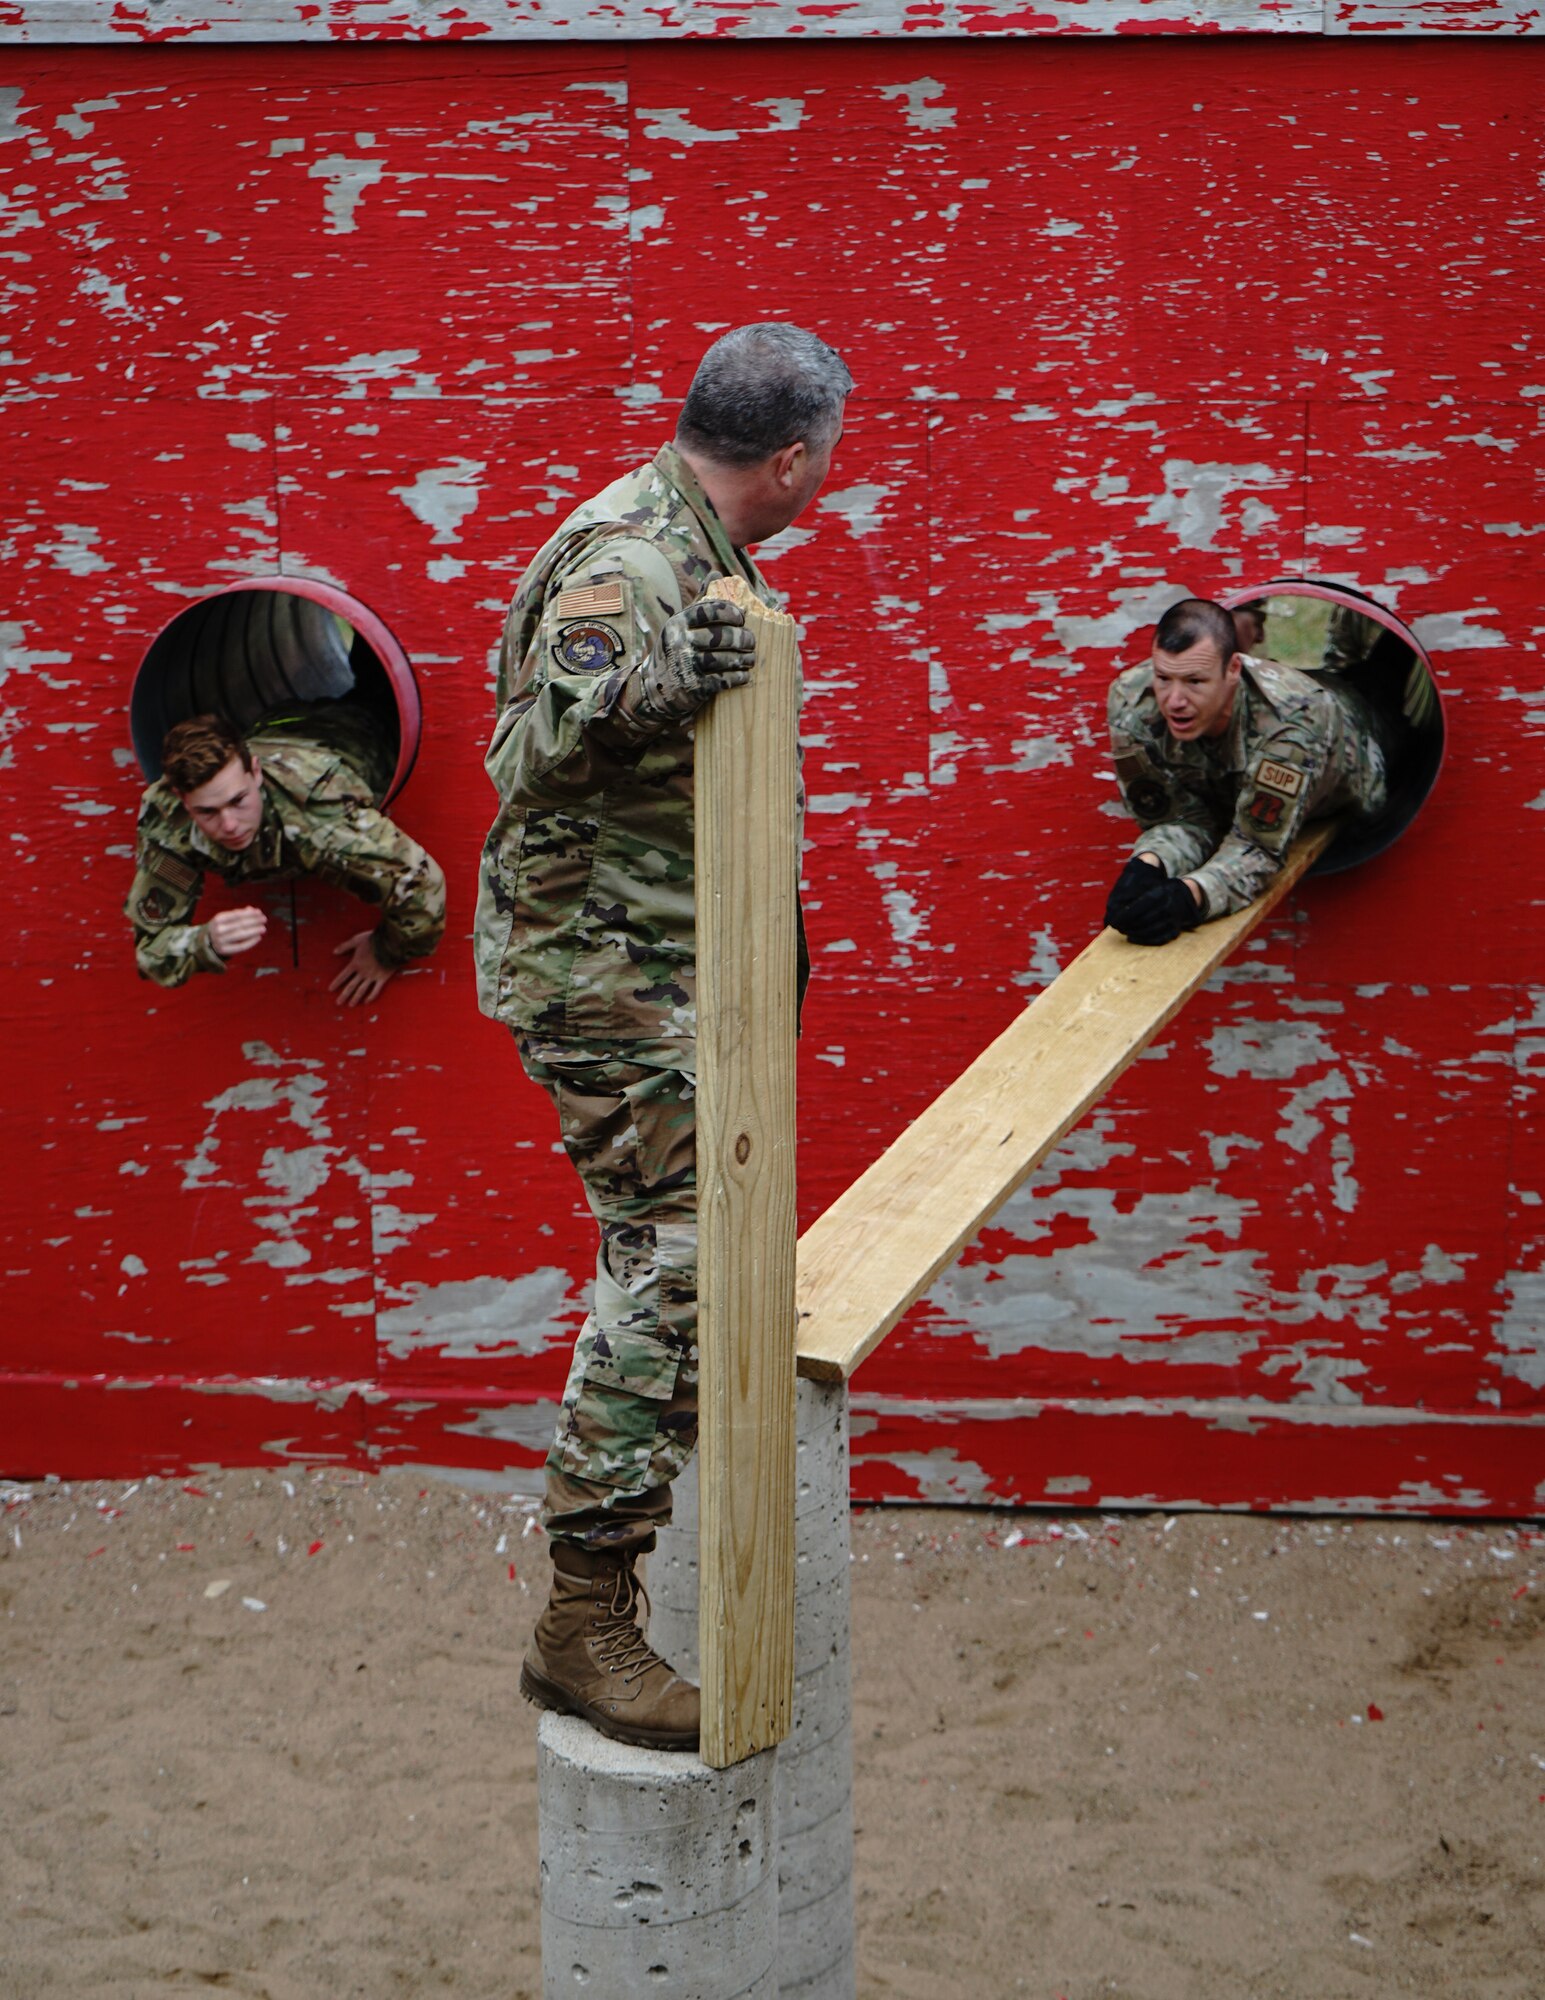 U.S. Air Force Airman 1st Class Braydon Burds, left, Master Sgt. Rory Canniff, right, and Master Sgt. Brian Prestegaard, center, 133rd Logistics Readiness Squadron, participate in team building activities at Camp Ripley, Little Falls, Minn., May 8, 2023.